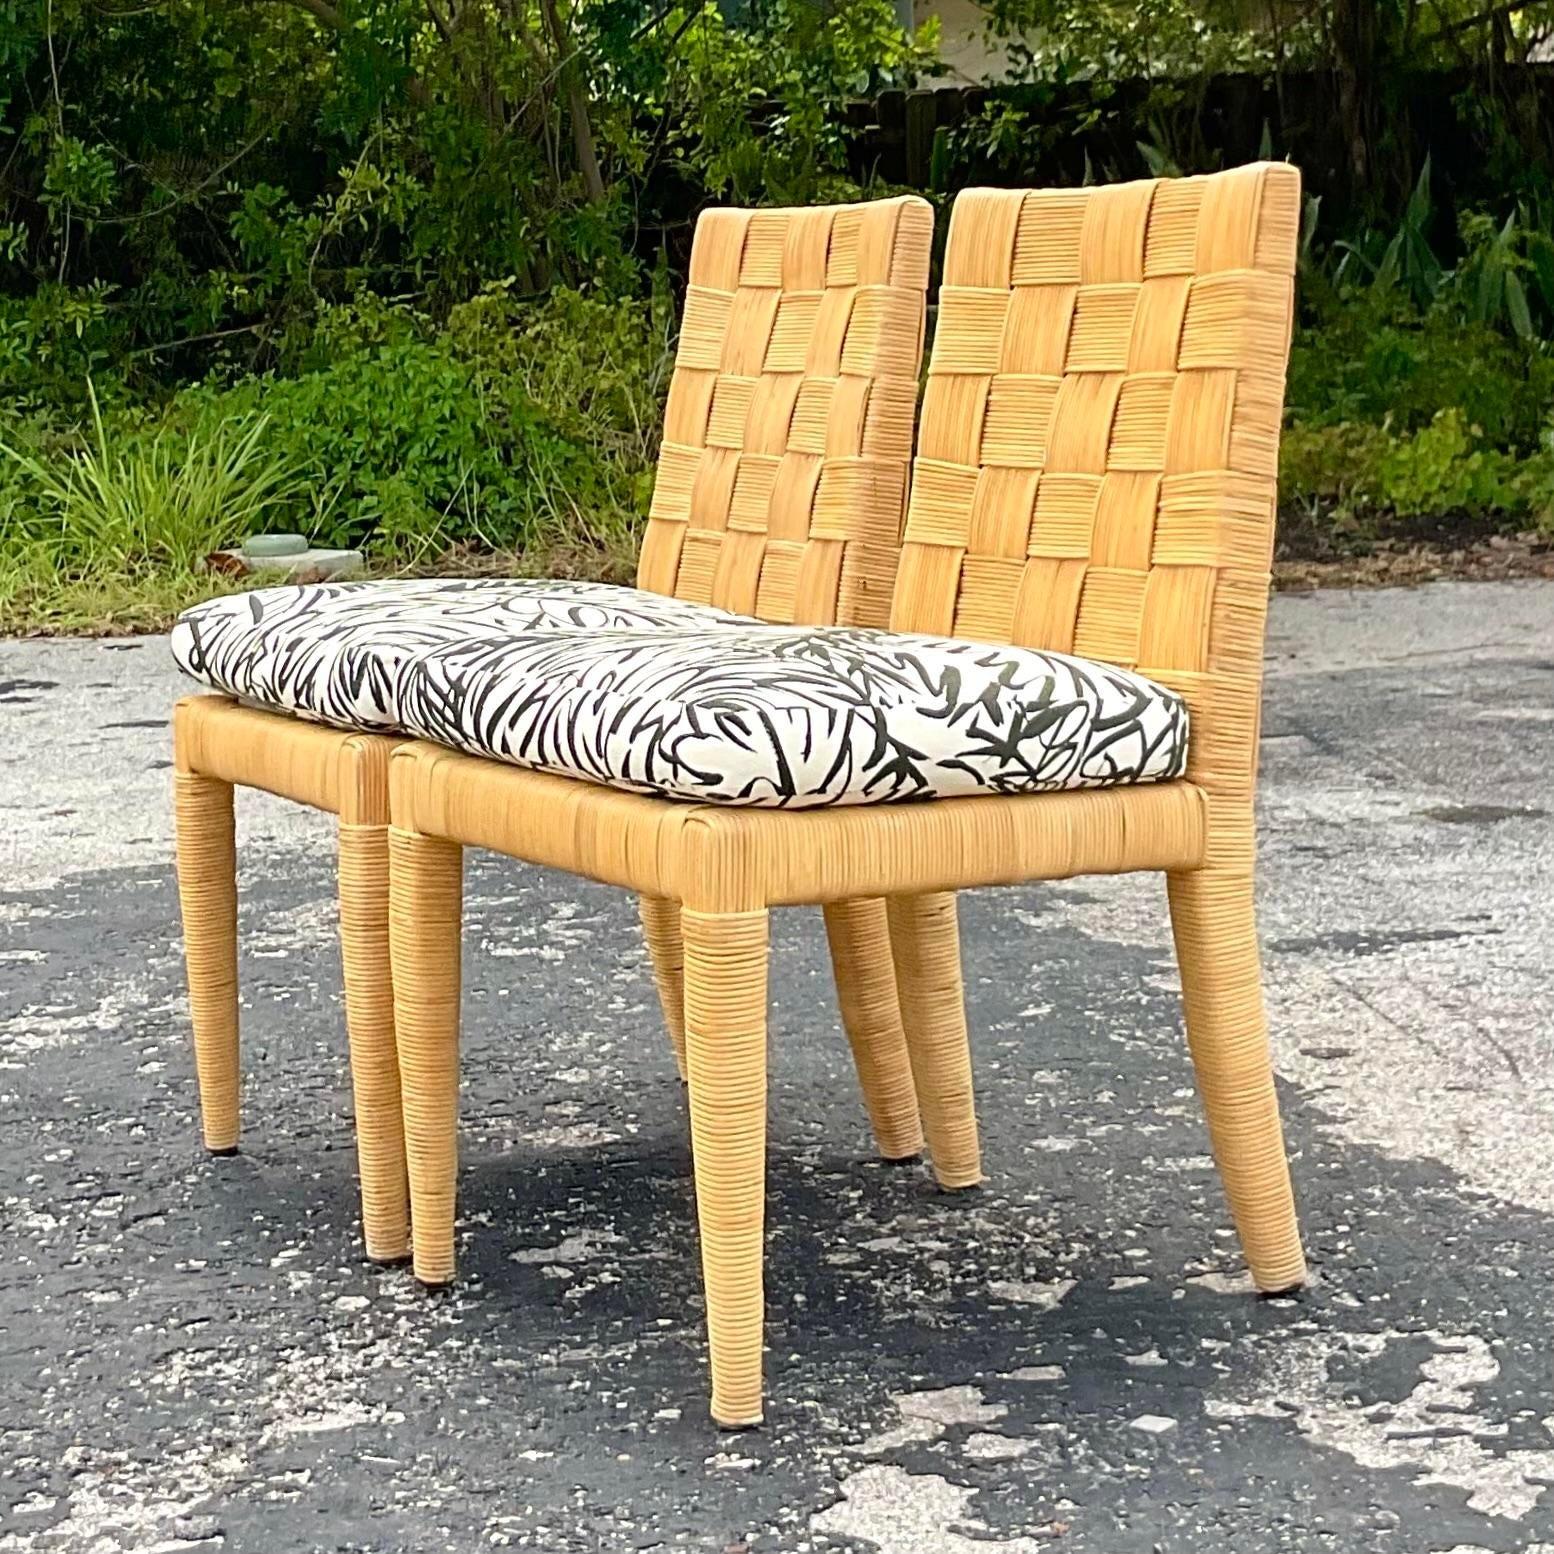 Vintage Coastal Donghia Block Island Dining Chairs - a Pair For Sale 2